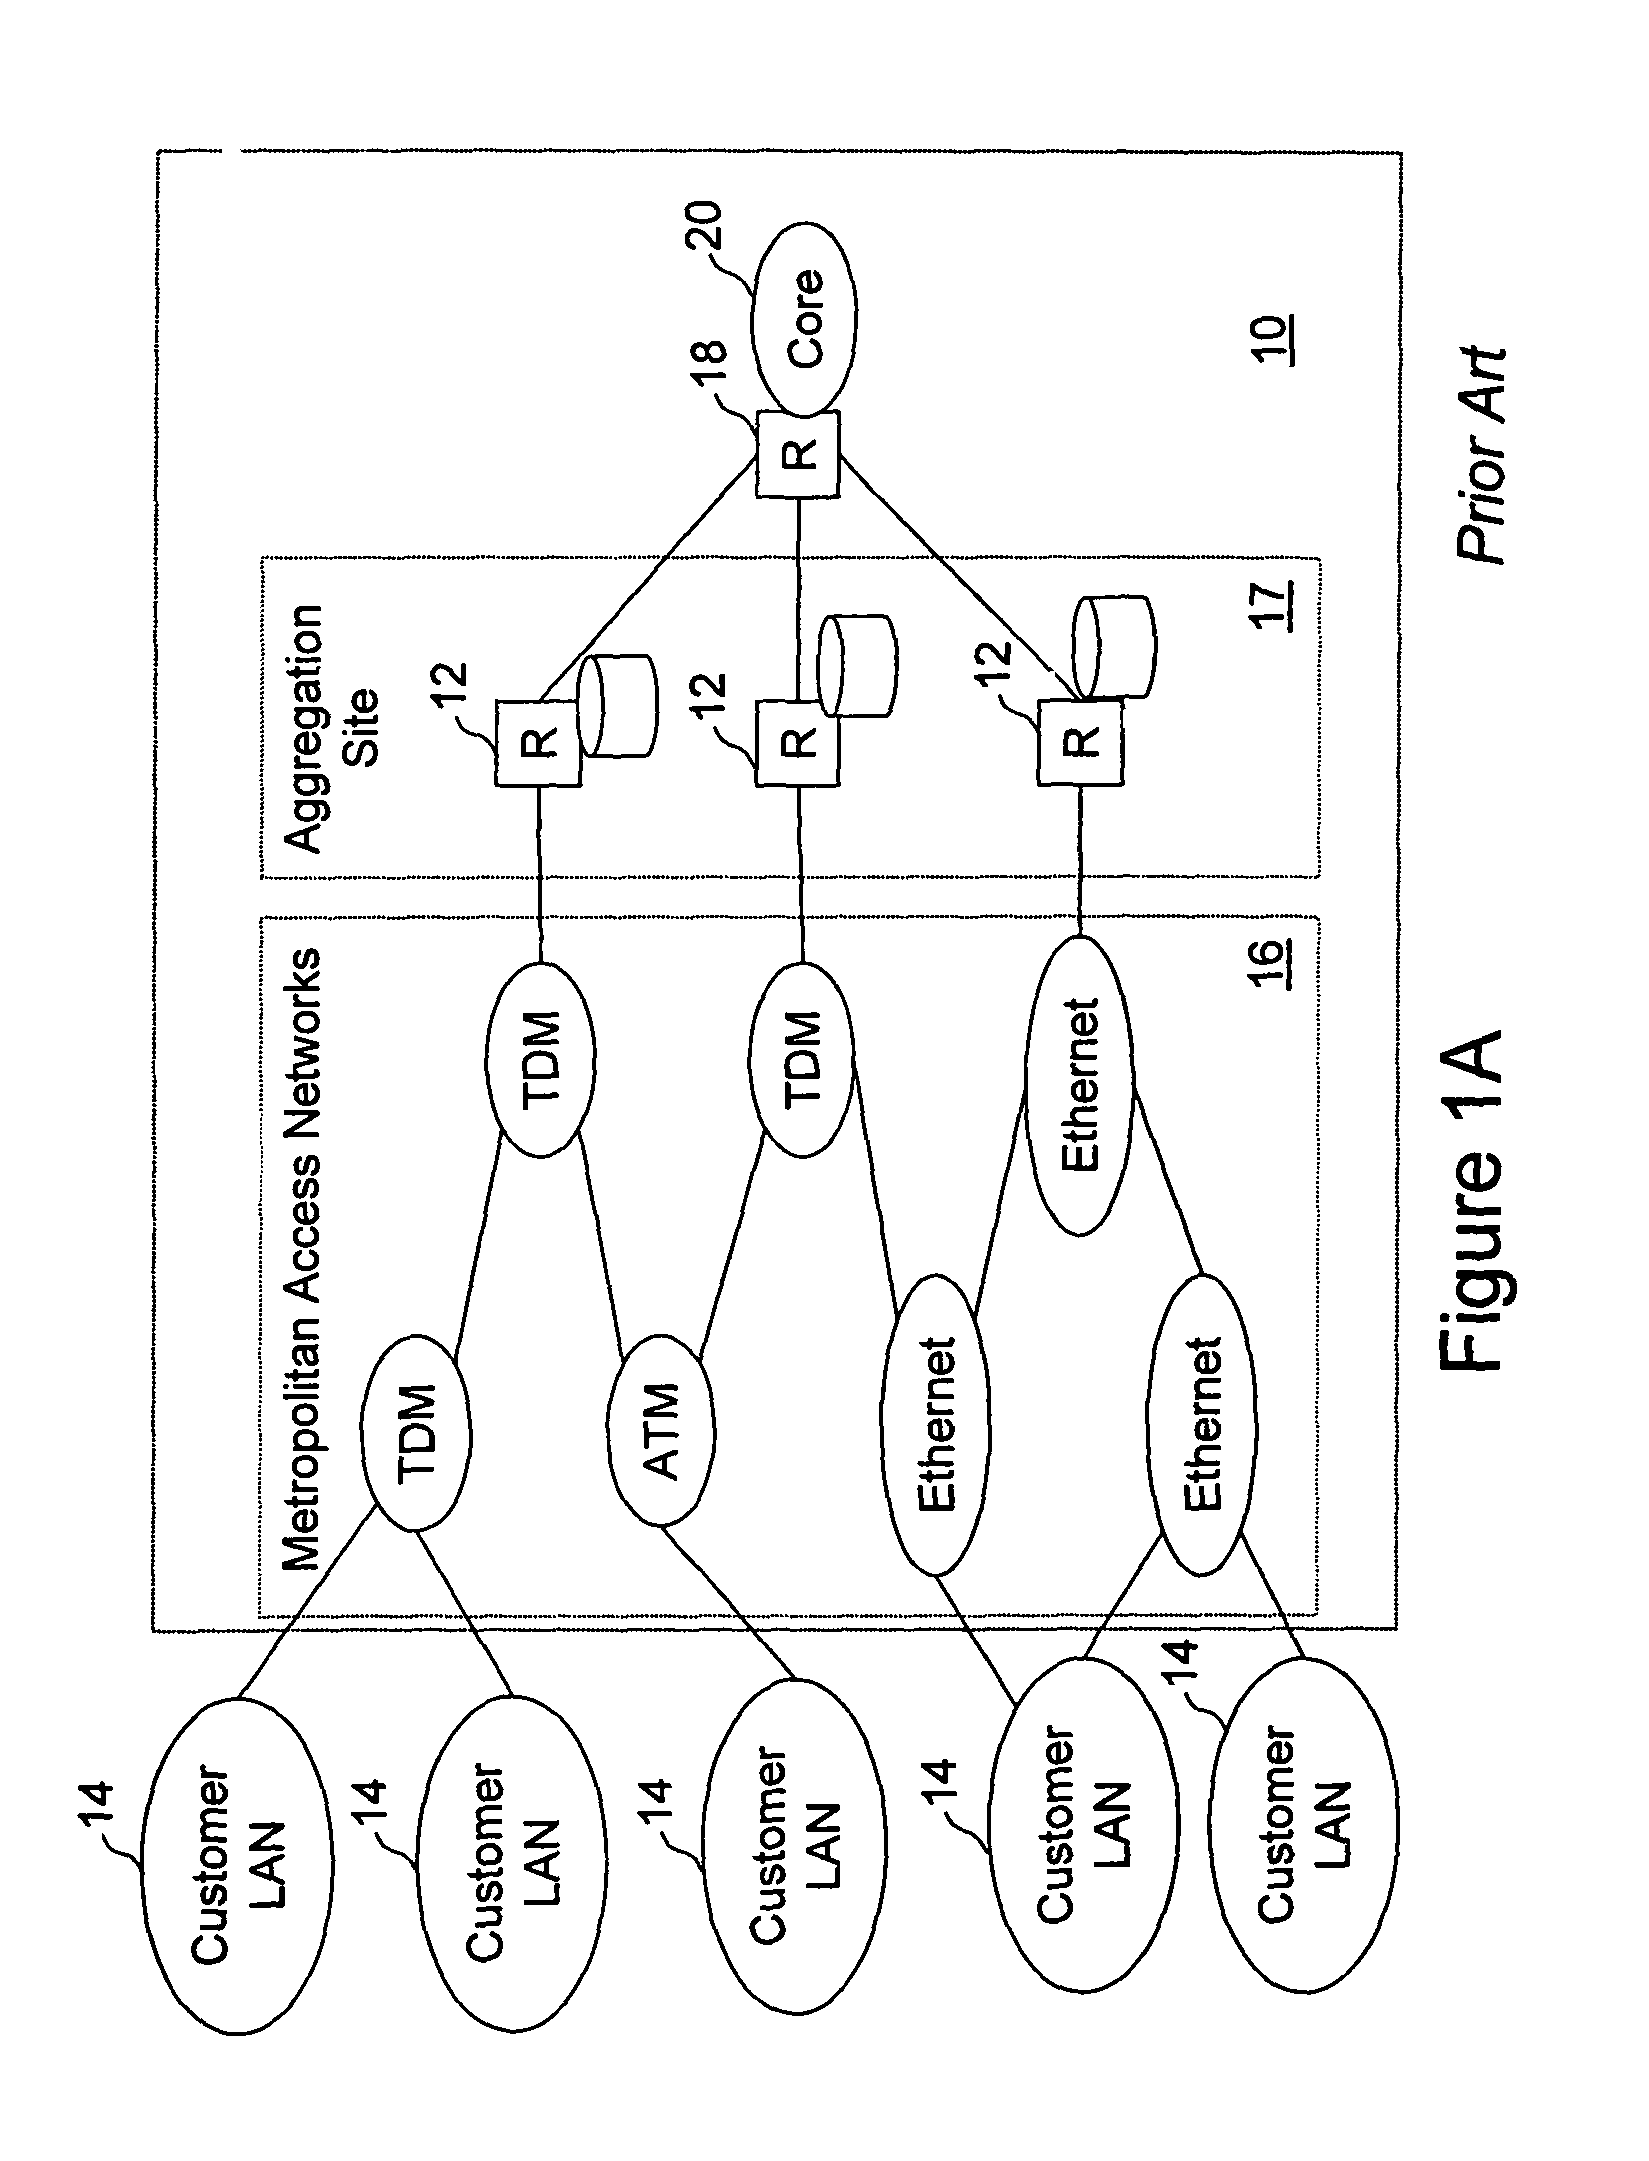 Message, control and reporting interface for a distributed network access system